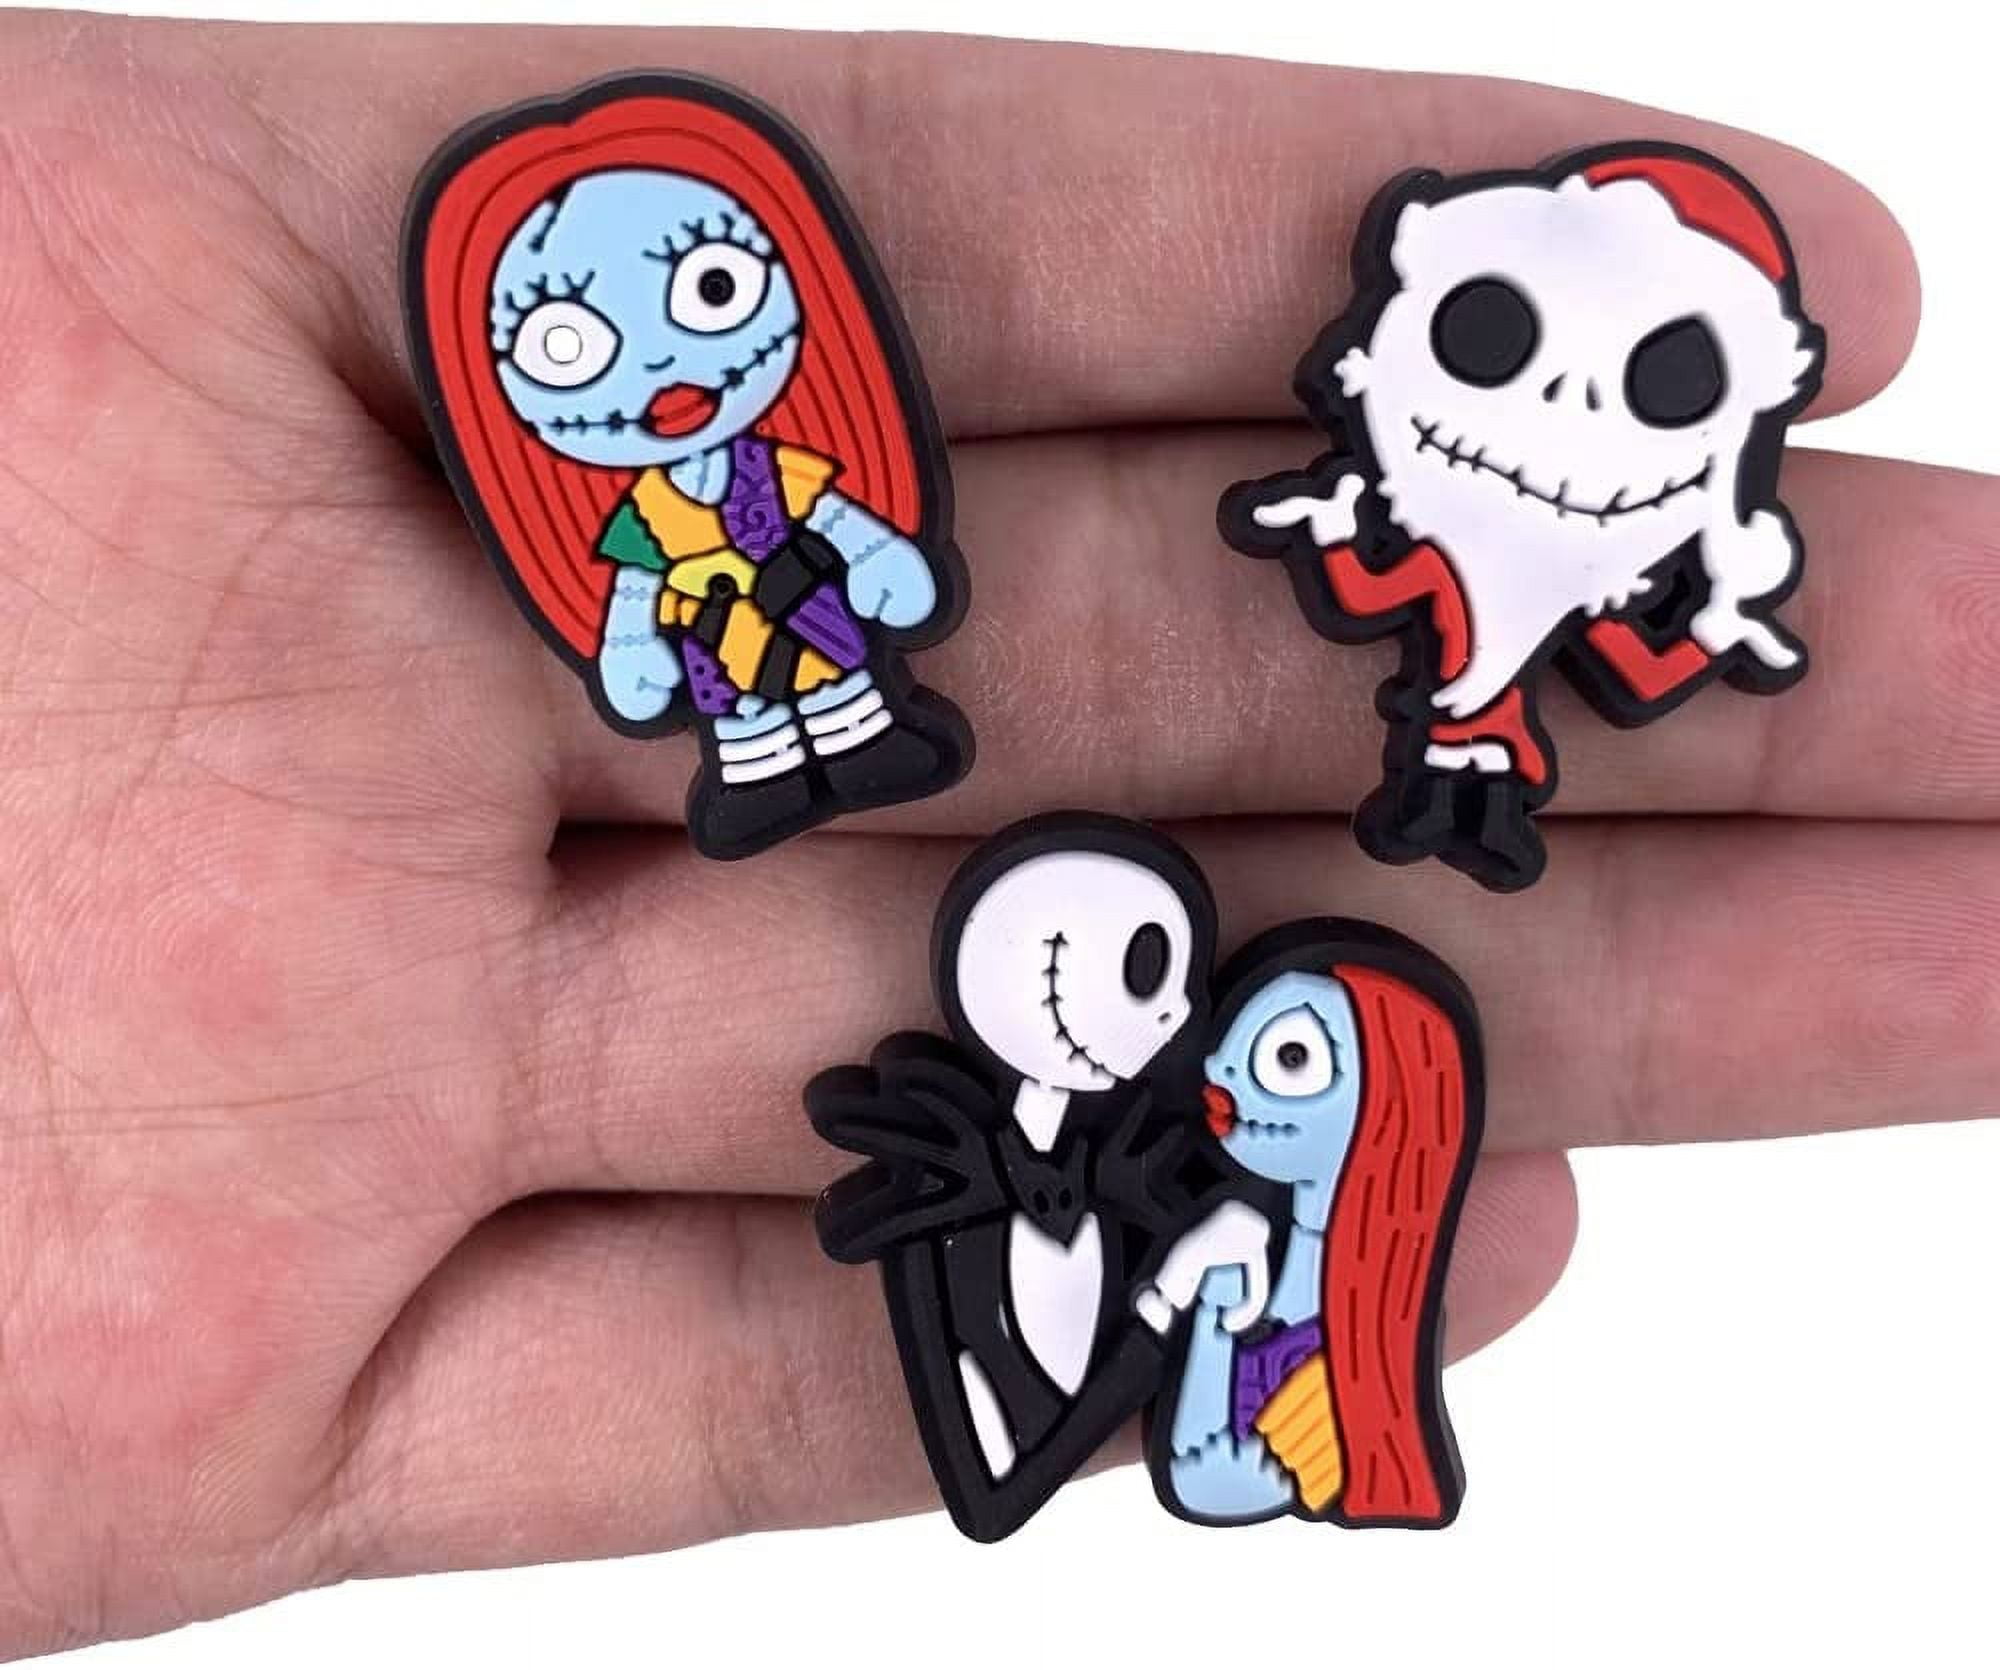 Nightmare Before Christmas Croc Charms - Toys, Facebook Marketplace